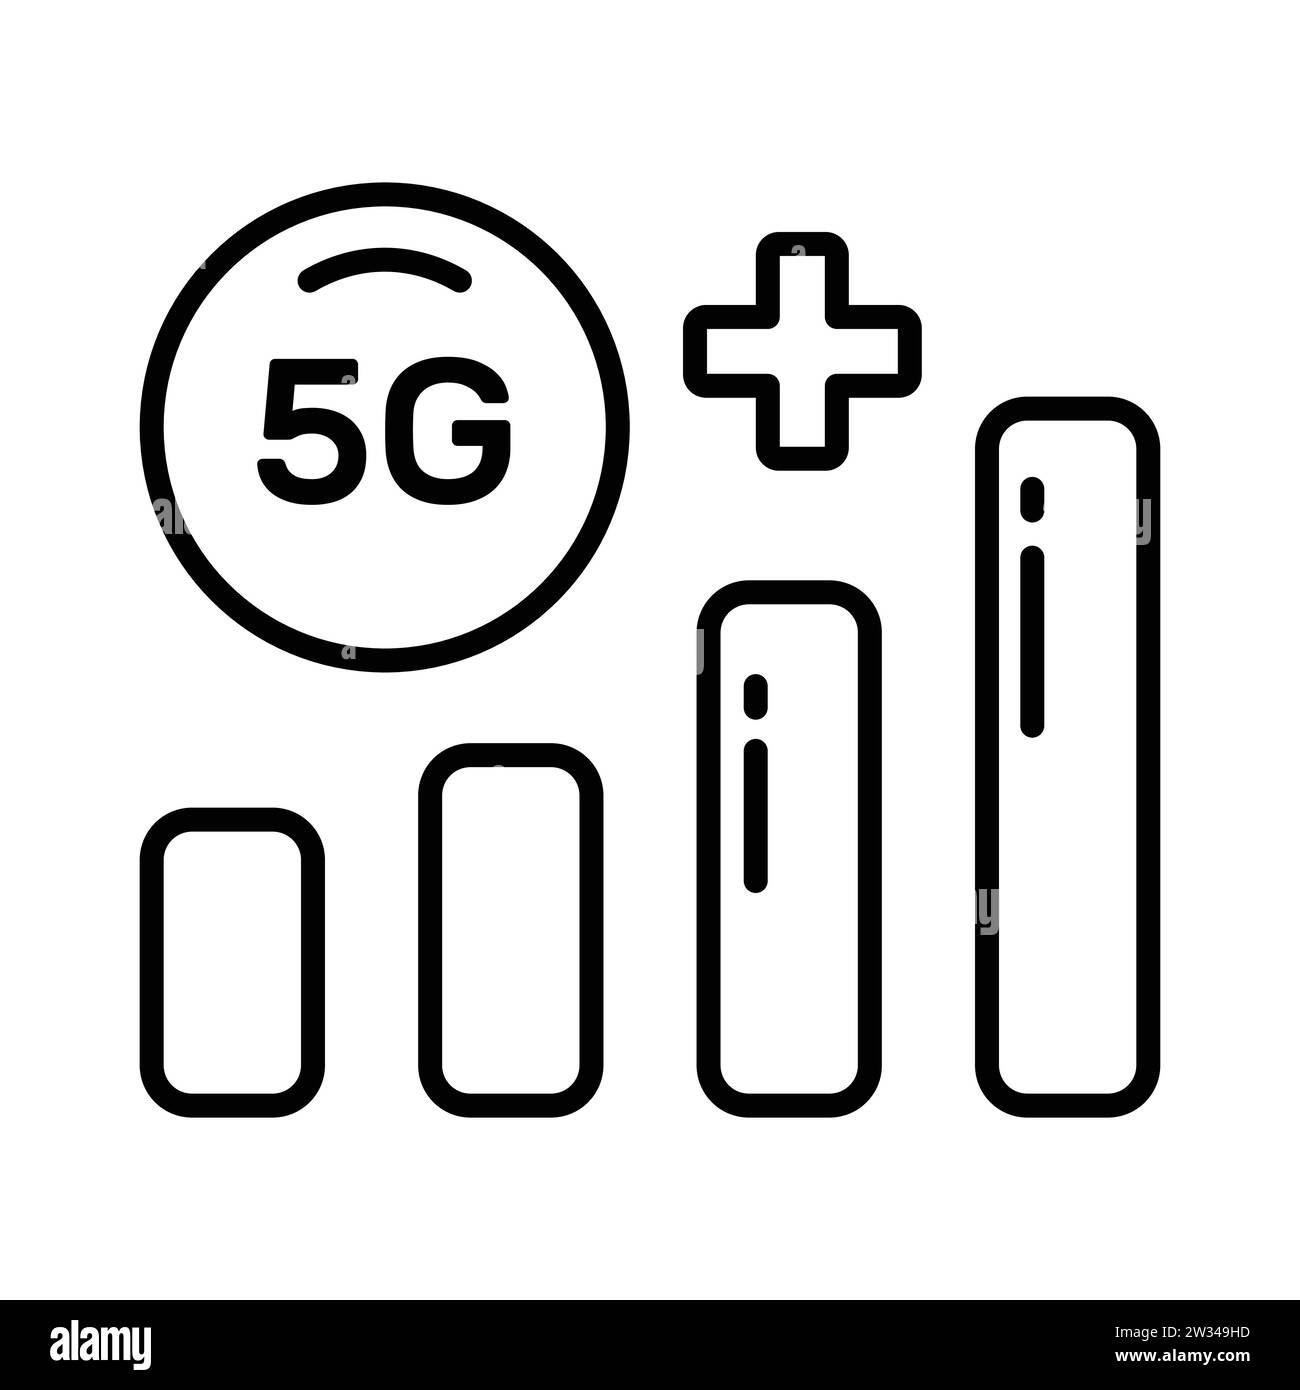 Beautifully designed vector of 5G technology signals in trendy style, premium icon Stock Vector